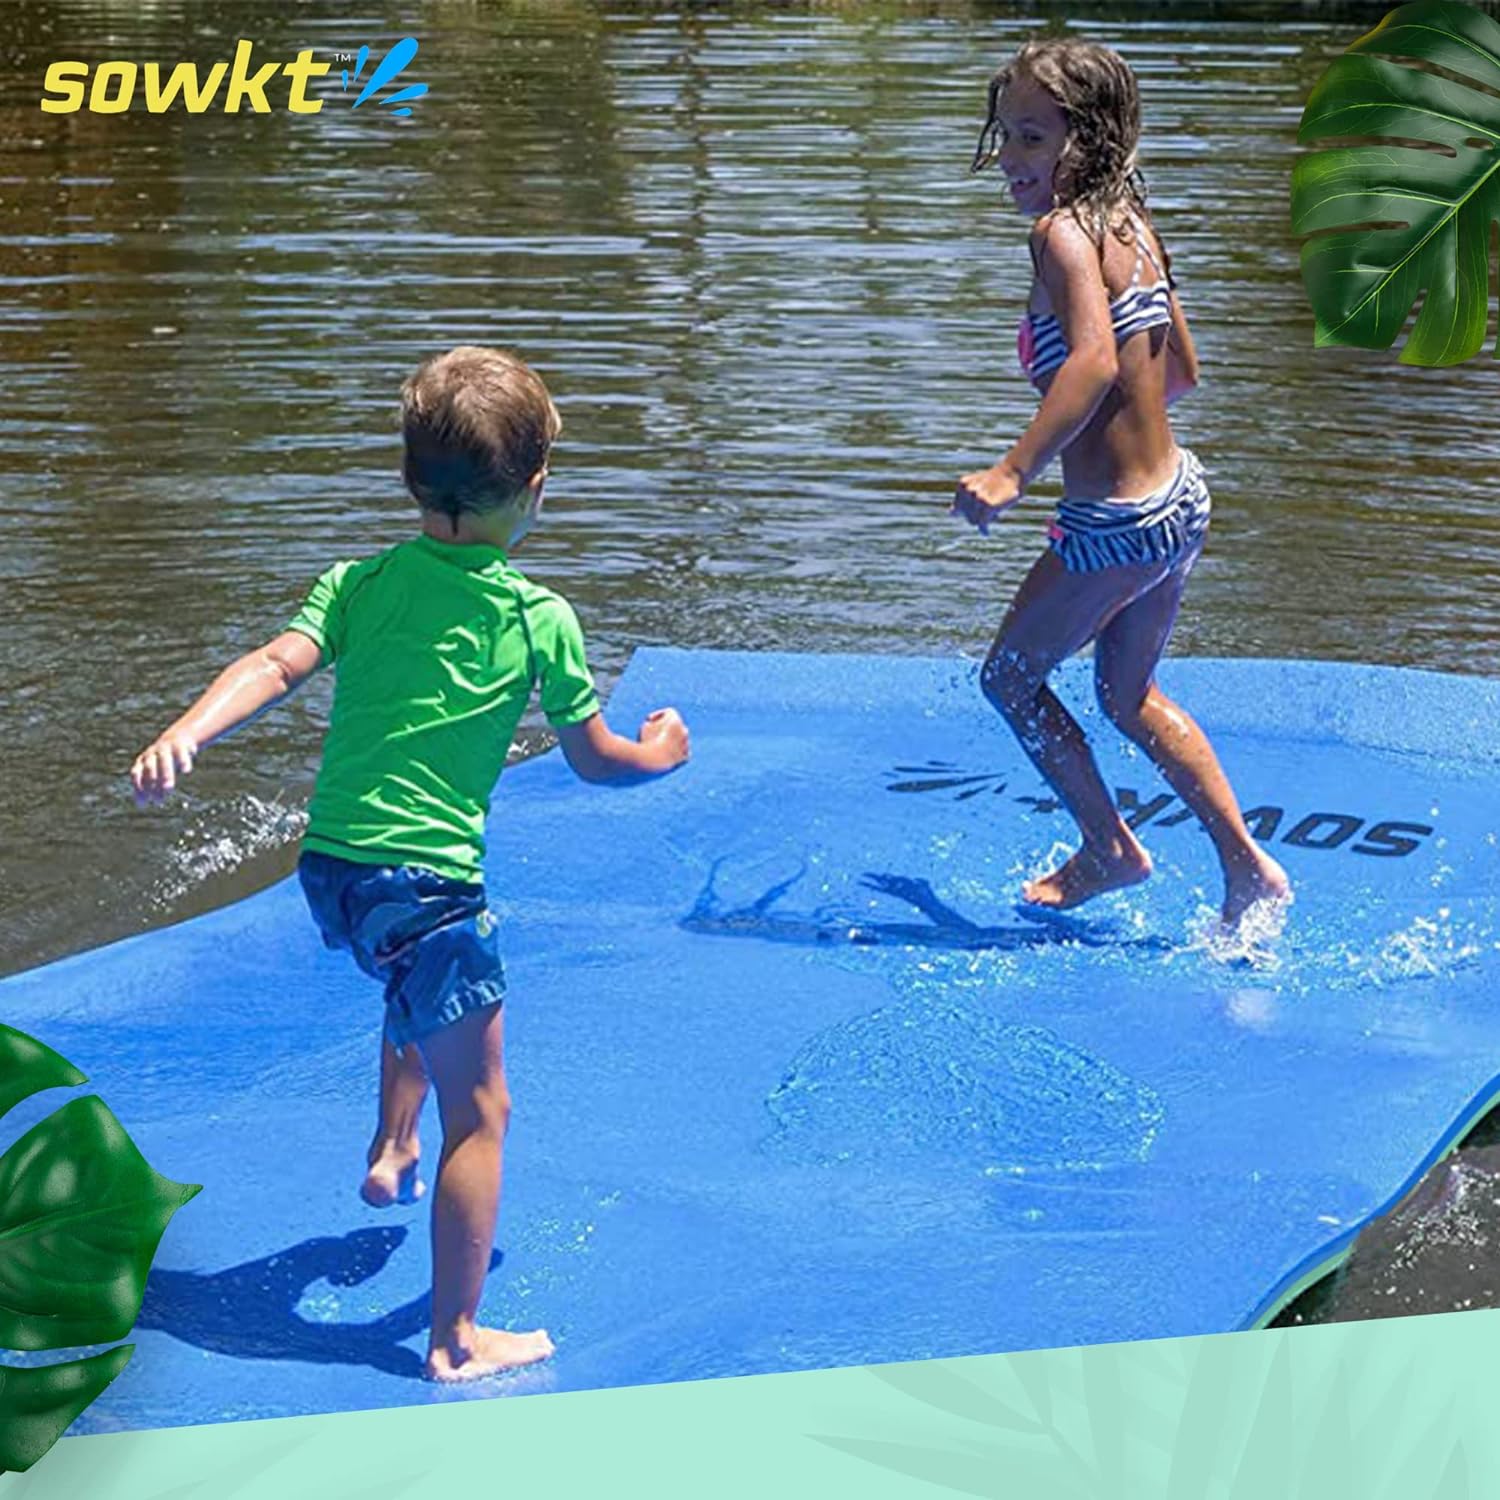 SOWKT Lily Pad Floating Mat (18 x 6 ft) - Made in USA - Premium Floating Water Mat for The Lake and Boating - Giant Floating Water Pad for Lakes | Lilly Pad Floating Water Dock (Blue/Green)